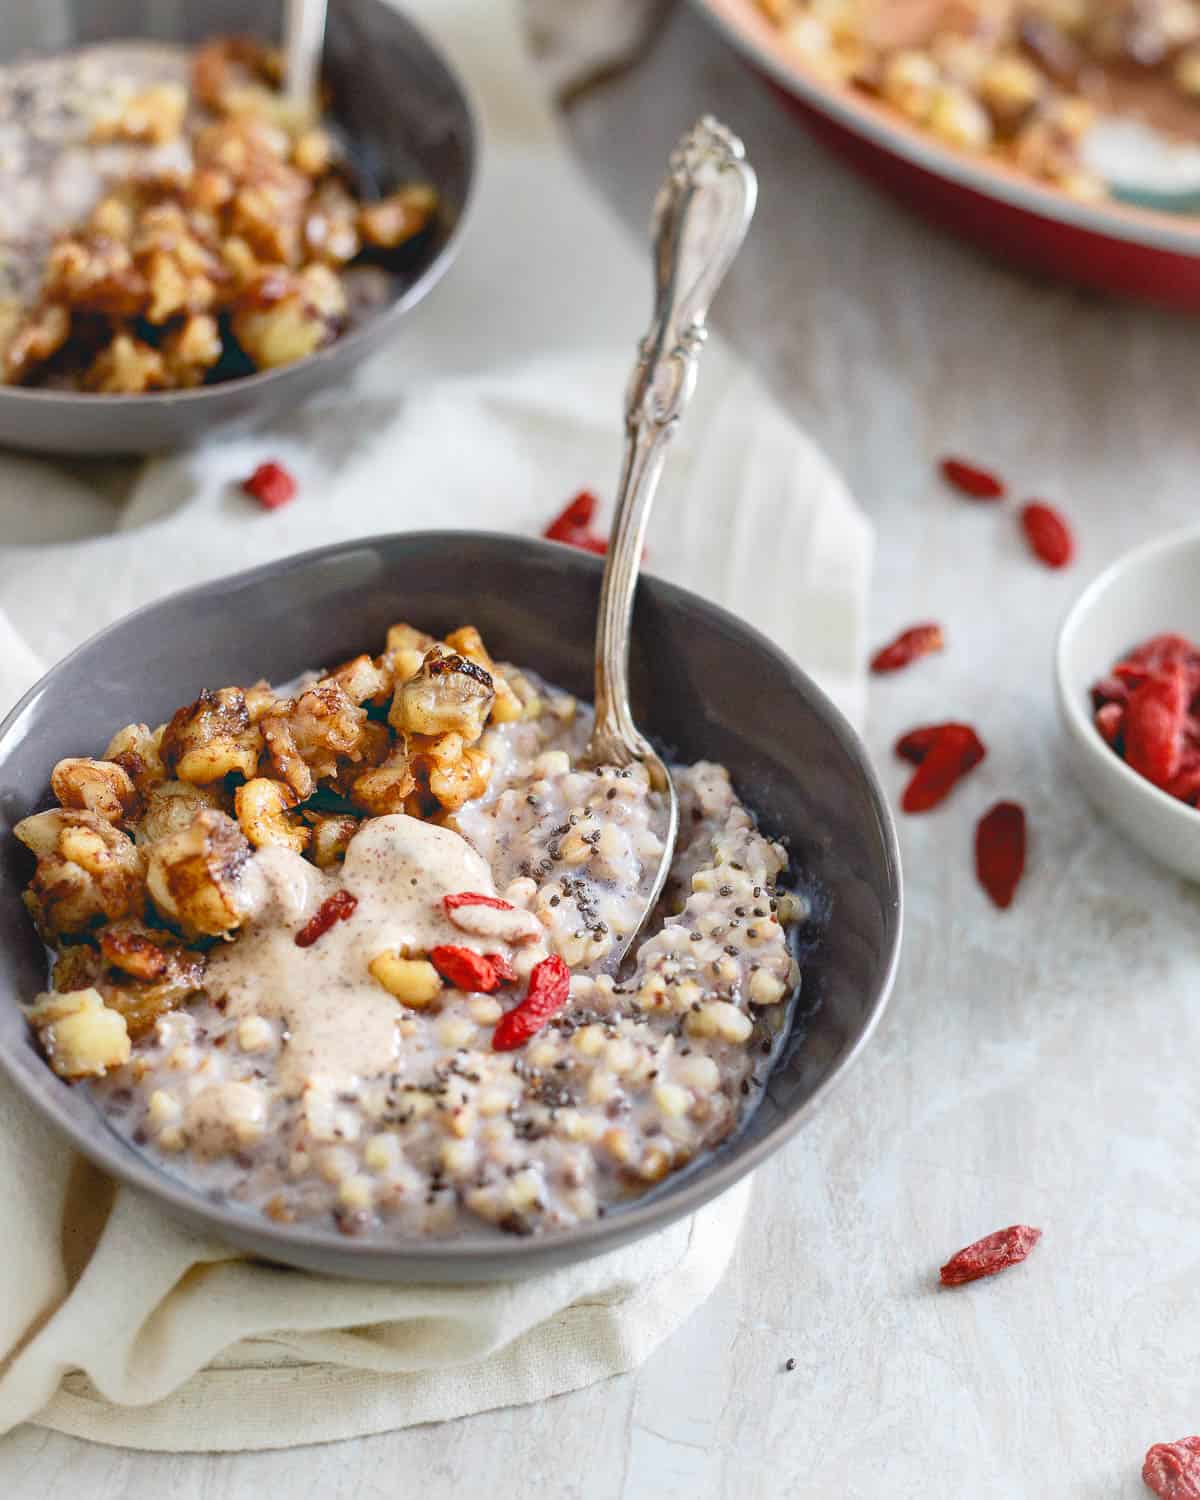 This quinoa cereal is a warm breakfast cereal option with a bit more nutritional bang for your buck than that stuff in the boxes!